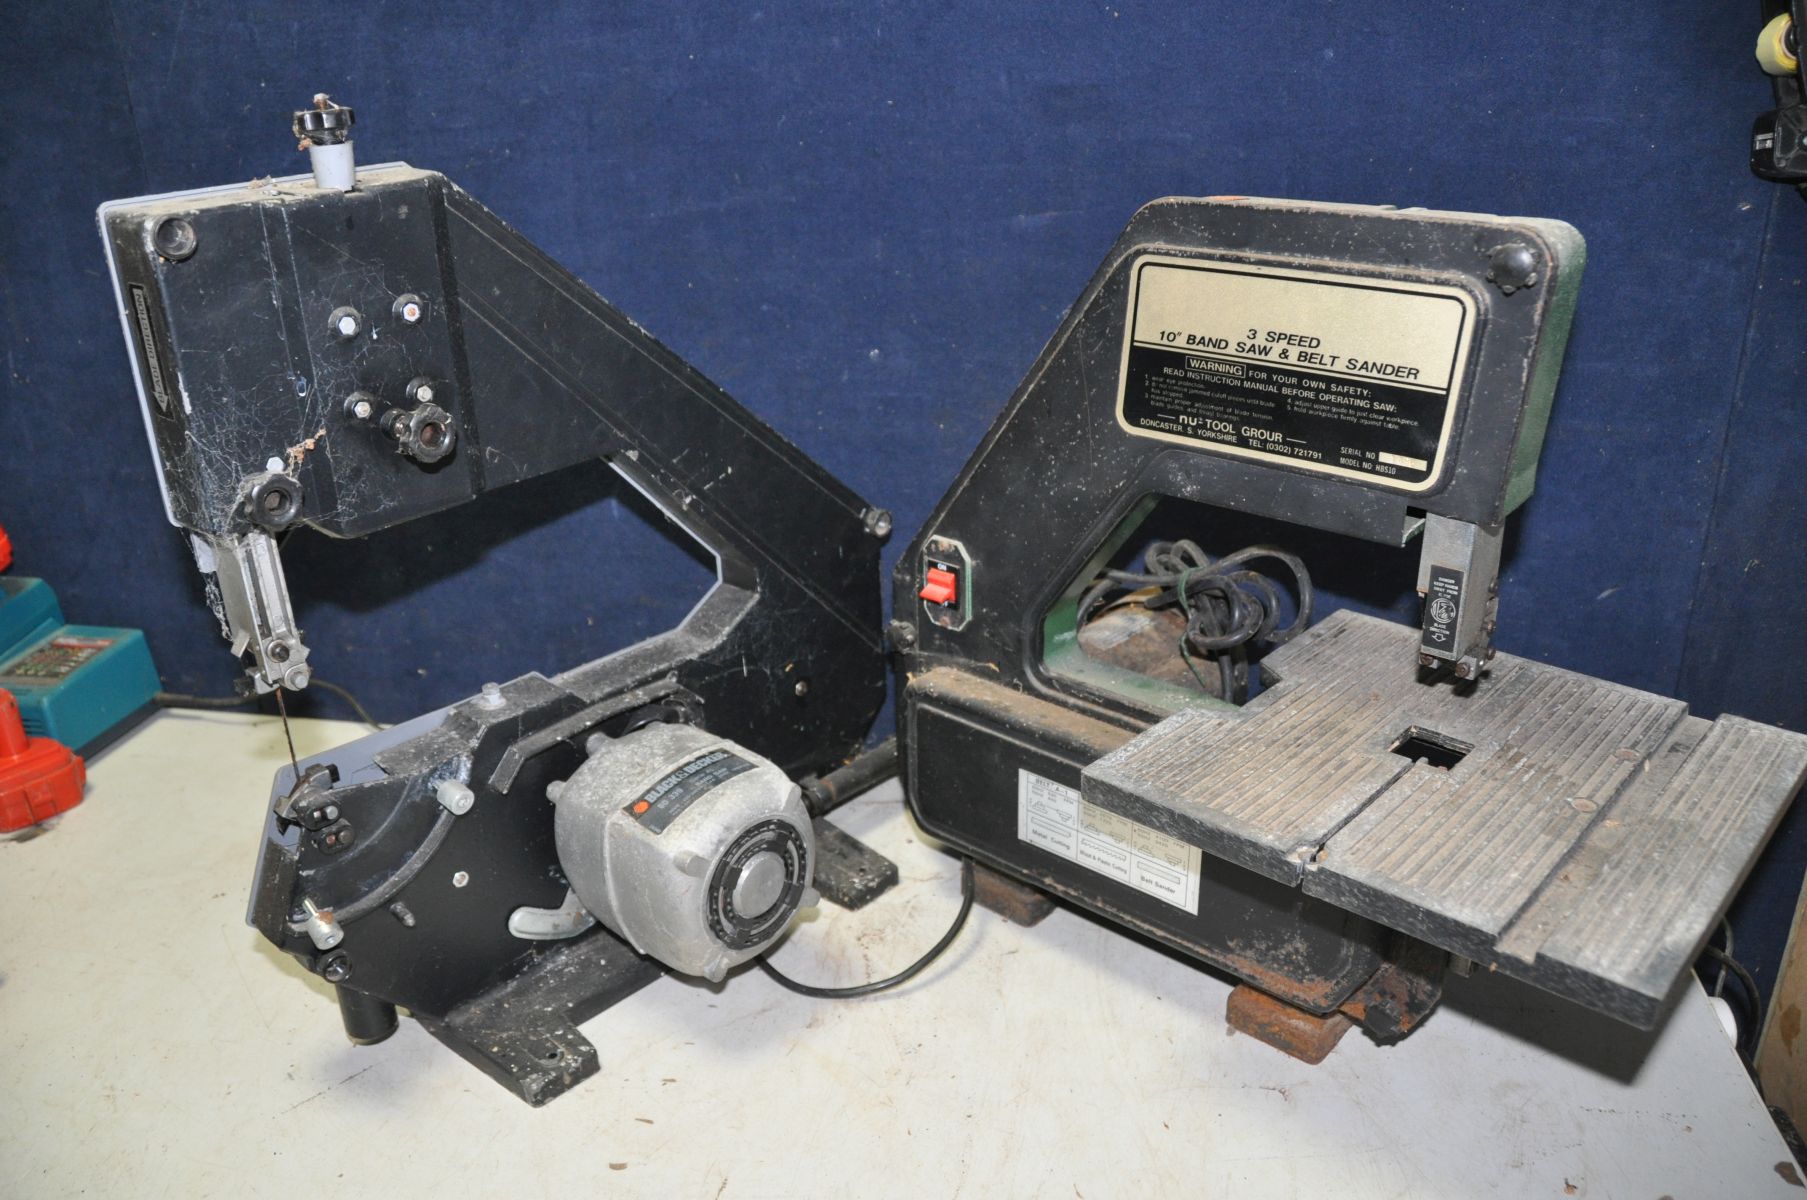 A BLACK AND DECKER BD-339 band saw along with a NU-TOOL GROUR HBS10 three speed band saw/belt sander - Bild 3 aus 3